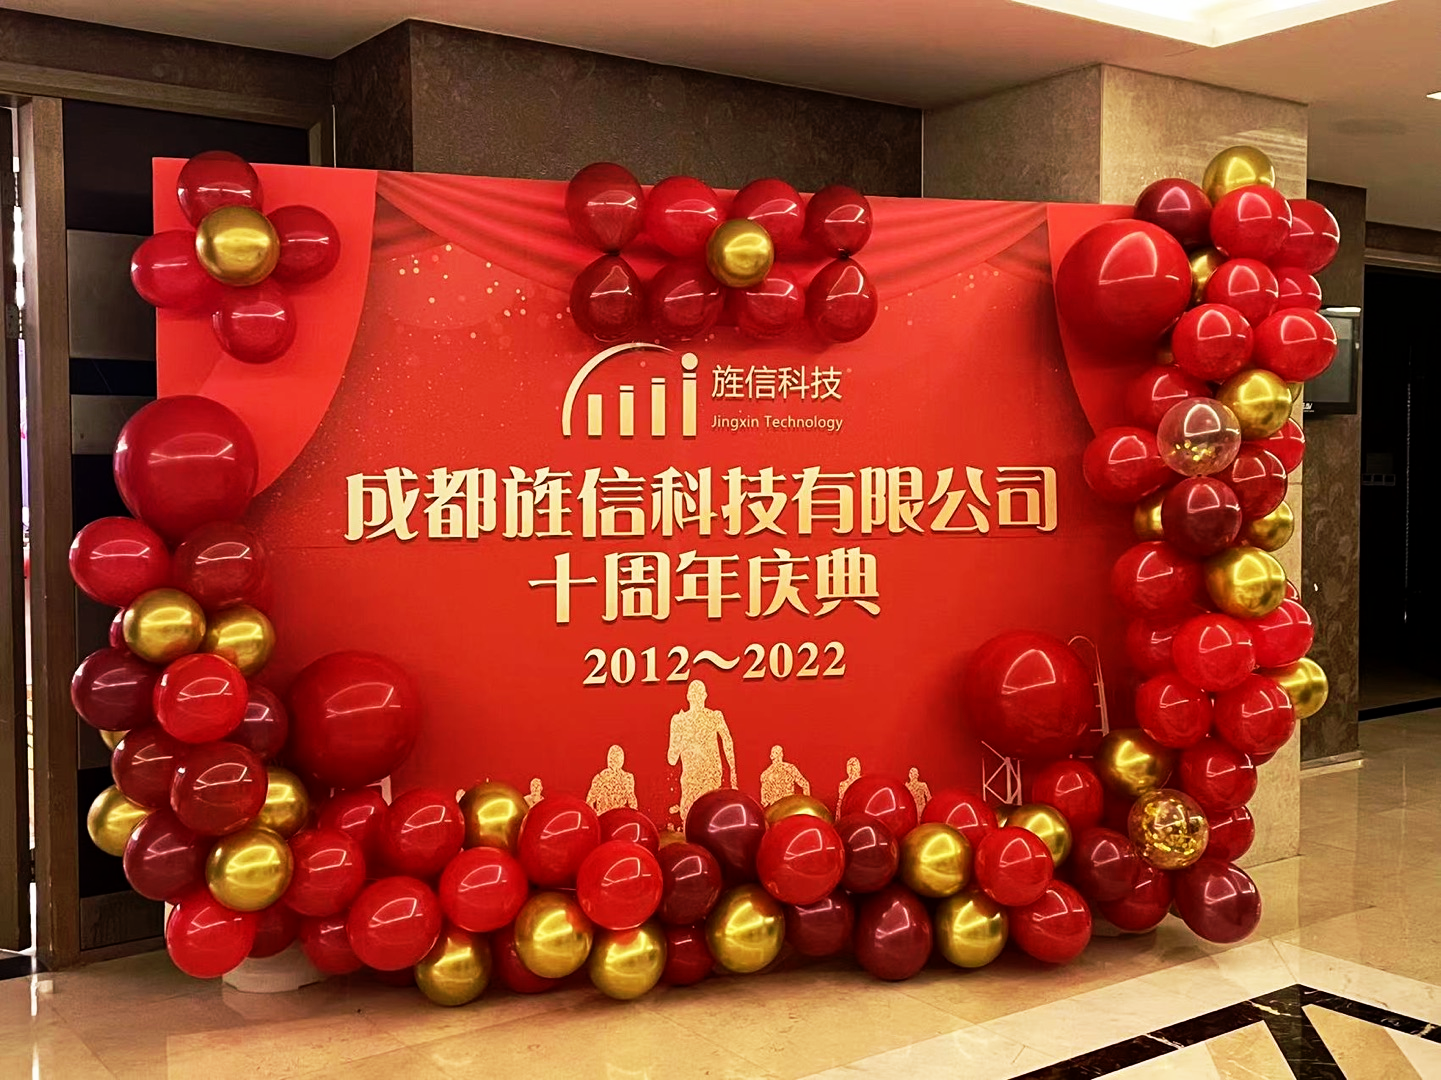 Celebrating the 10th Anniversary,Jingxin Entering the Development of Next Decade